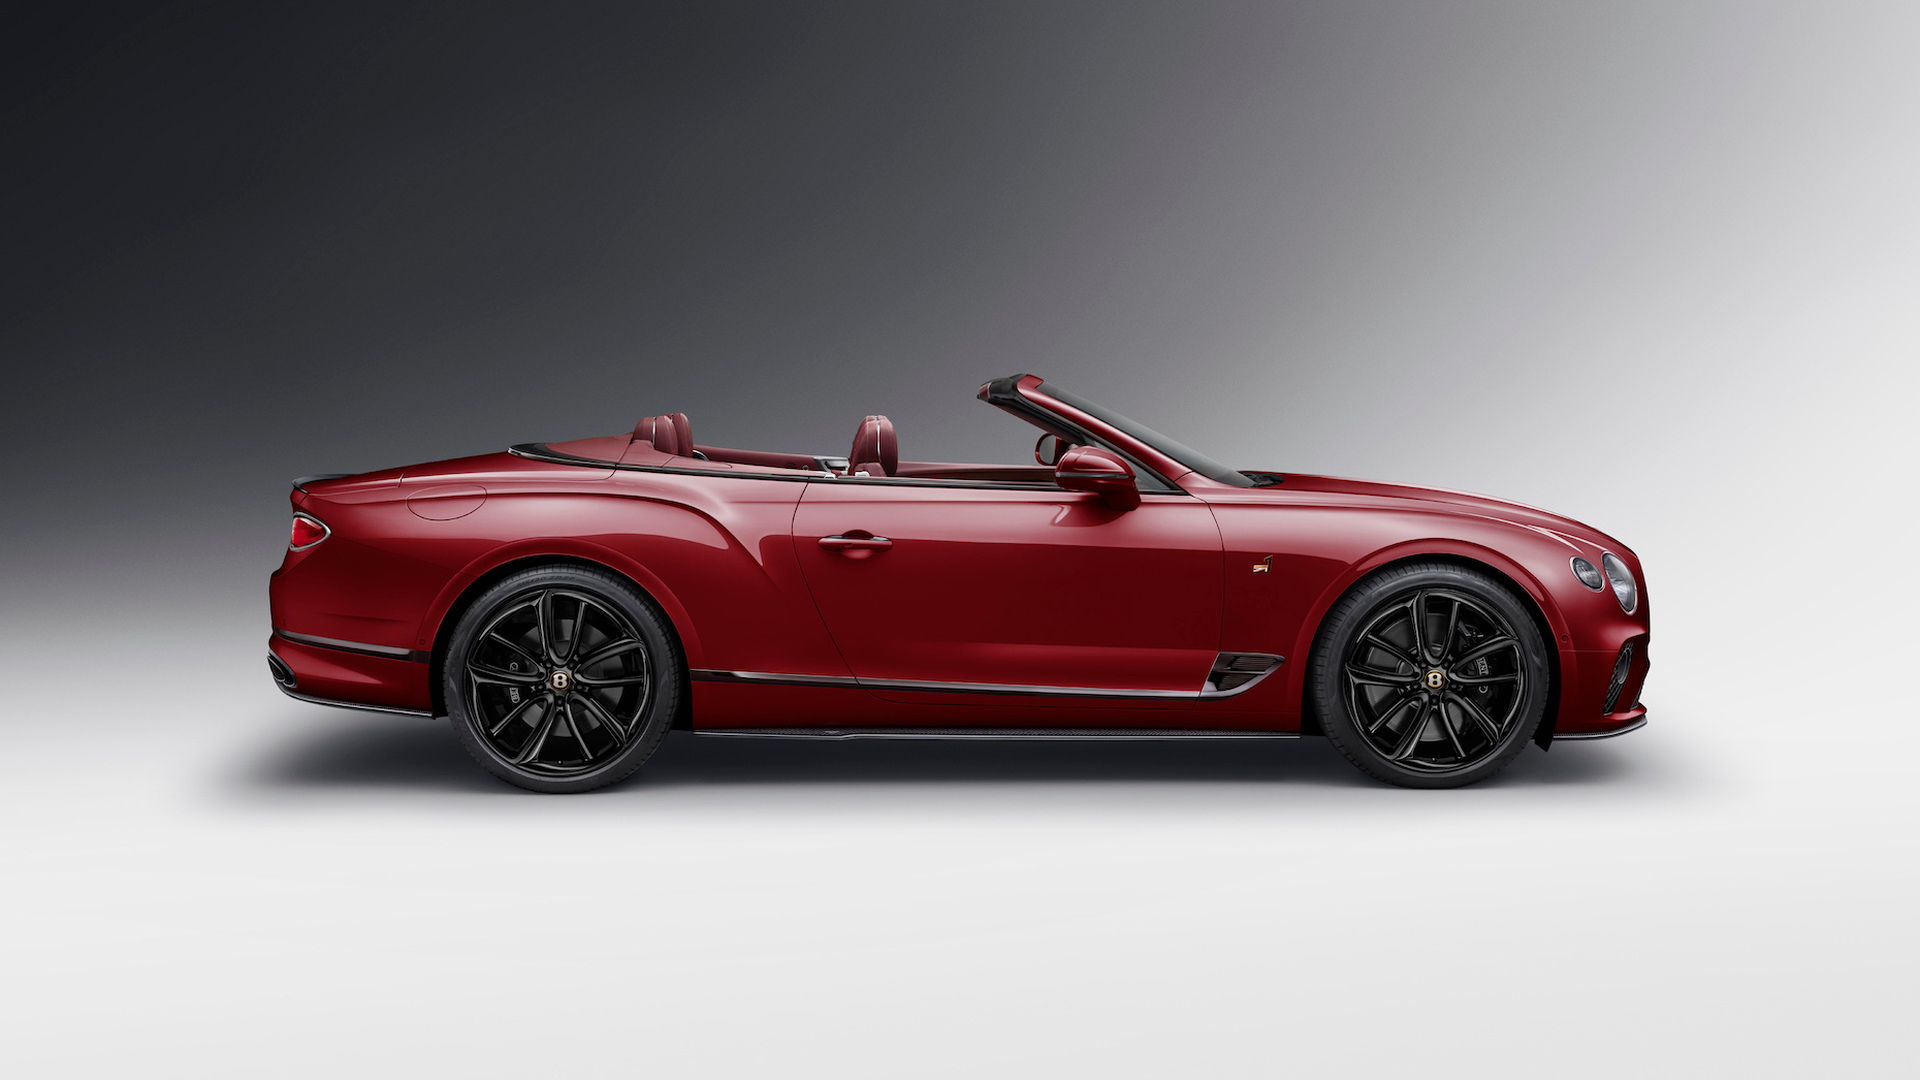 Bentley Continental GT convertible Number 1 edition